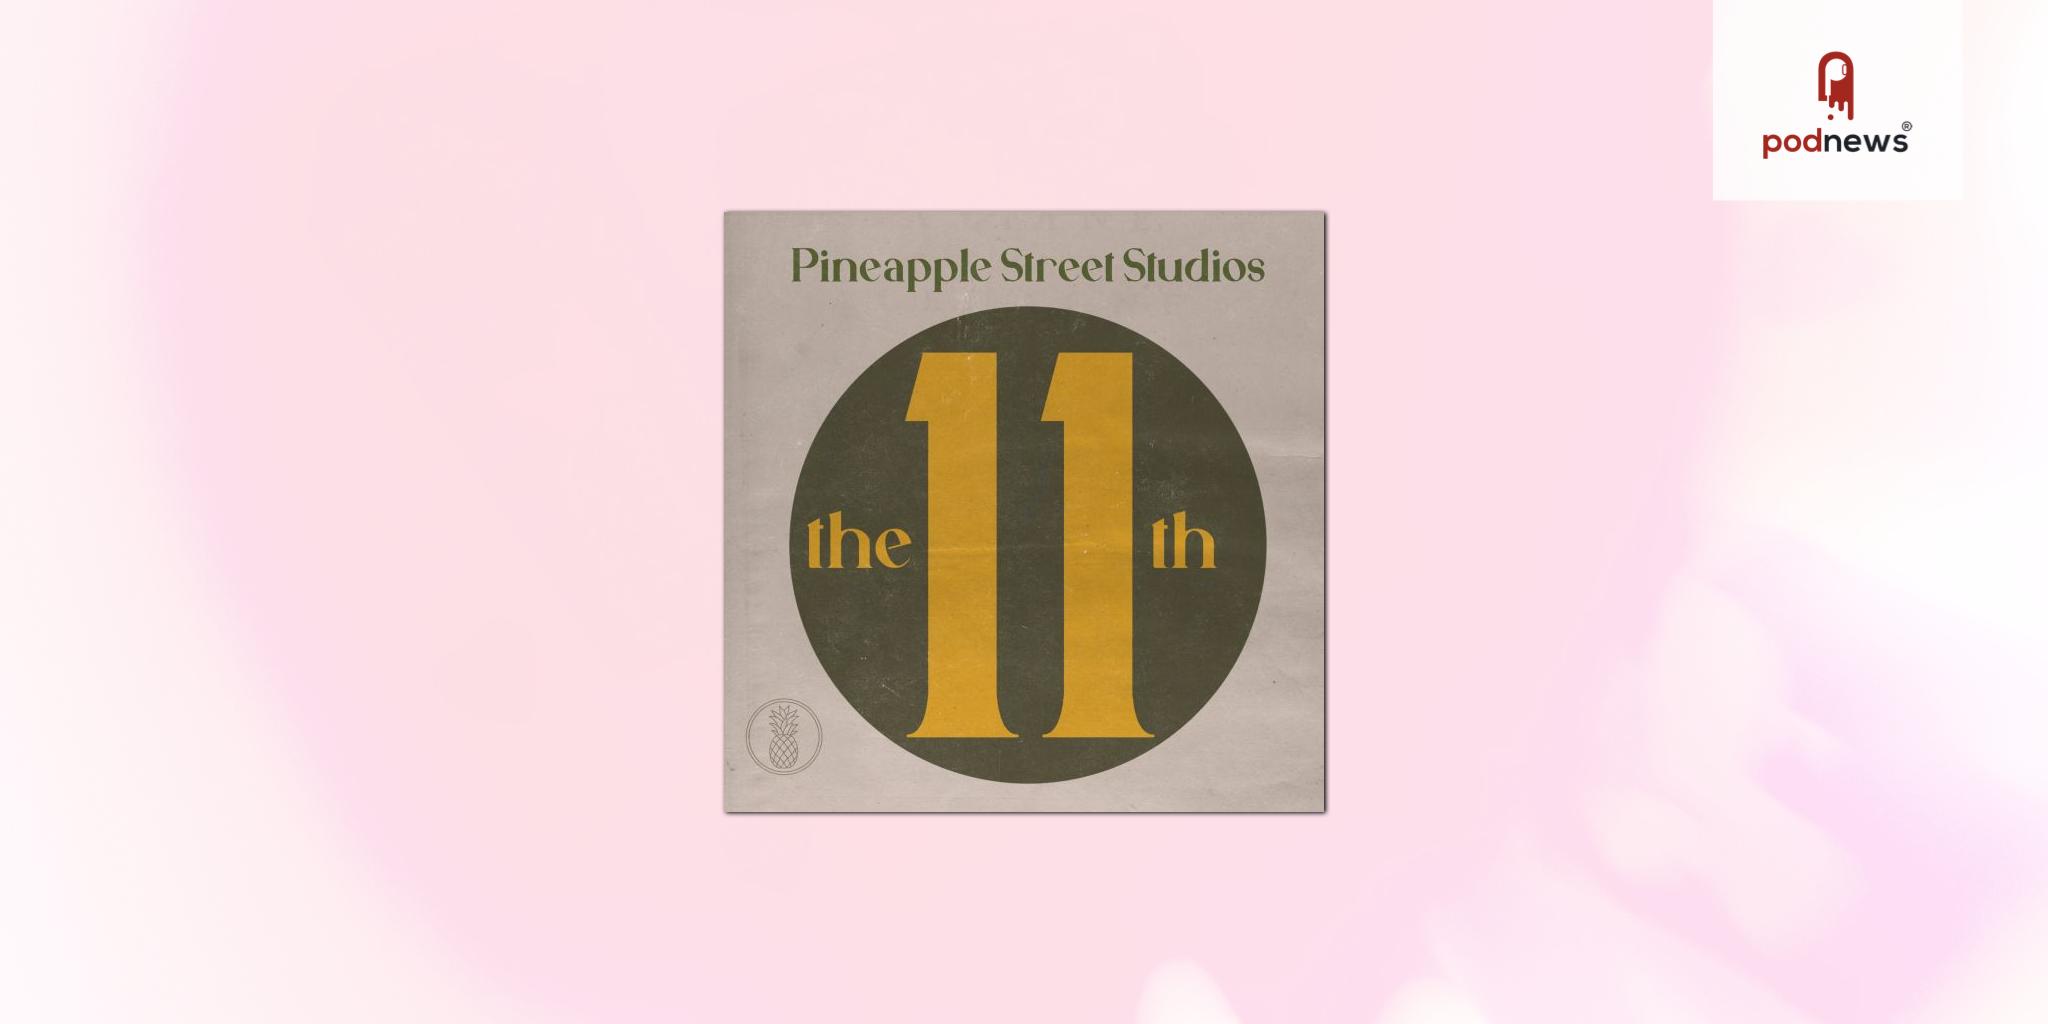 Pineapple Street Studios Introduces Innovative Podcast Format with Launch of Monthly Series The 11th